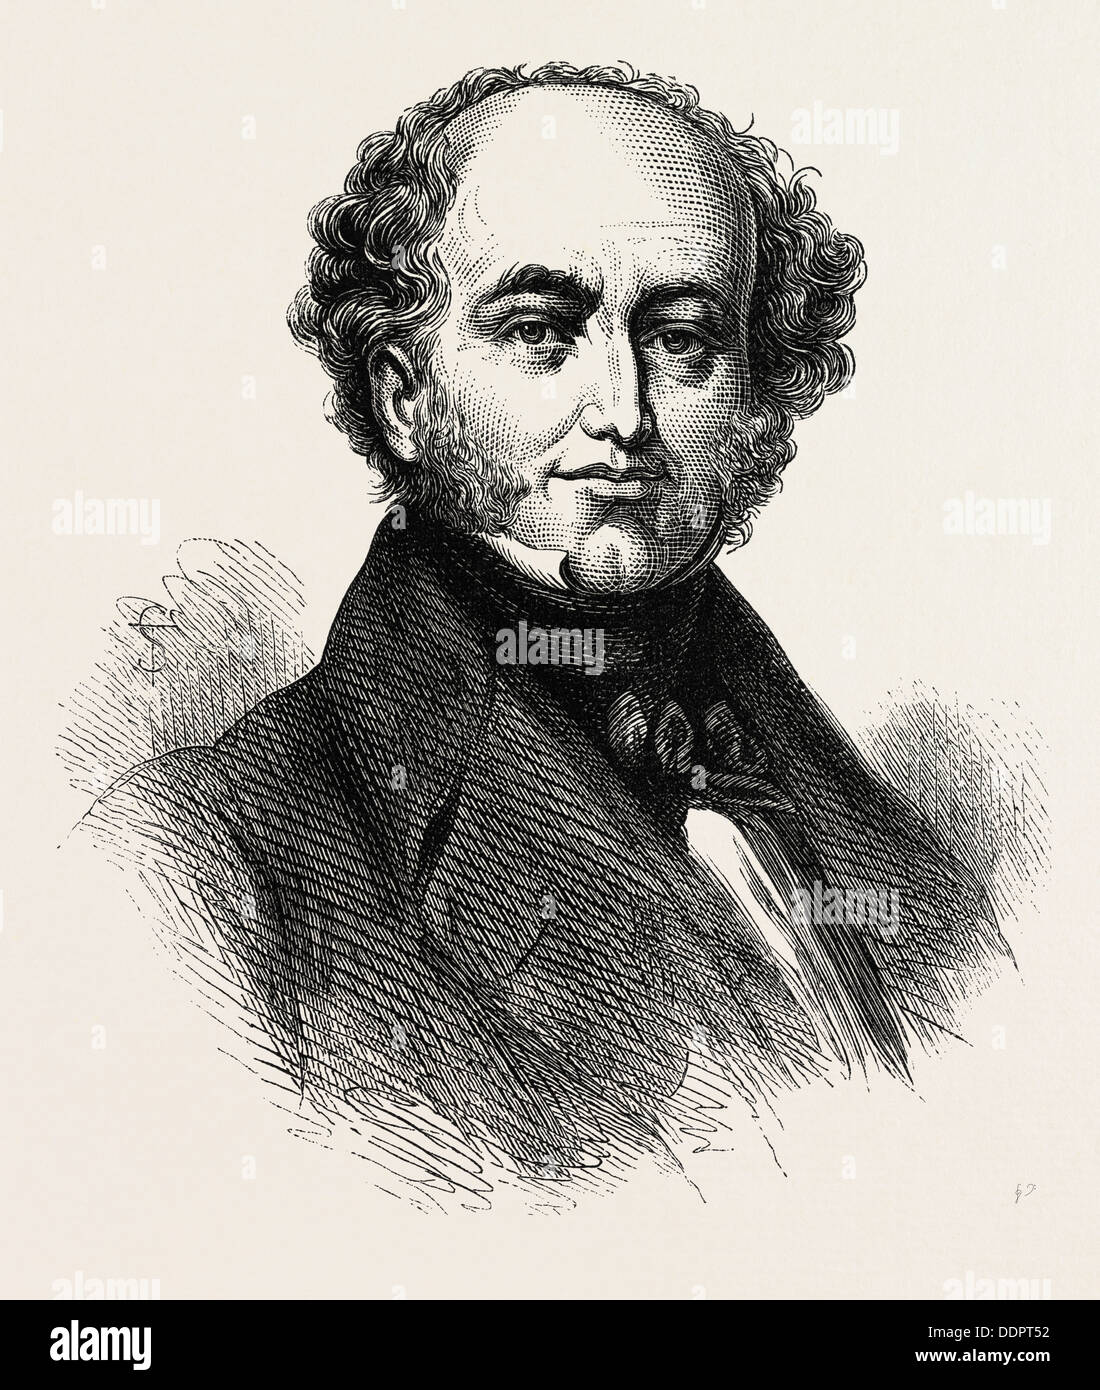 PRESIDENT VAN BUREN, He was the eighth President of the United States, US, USA, 1870s engraving Stock Photo